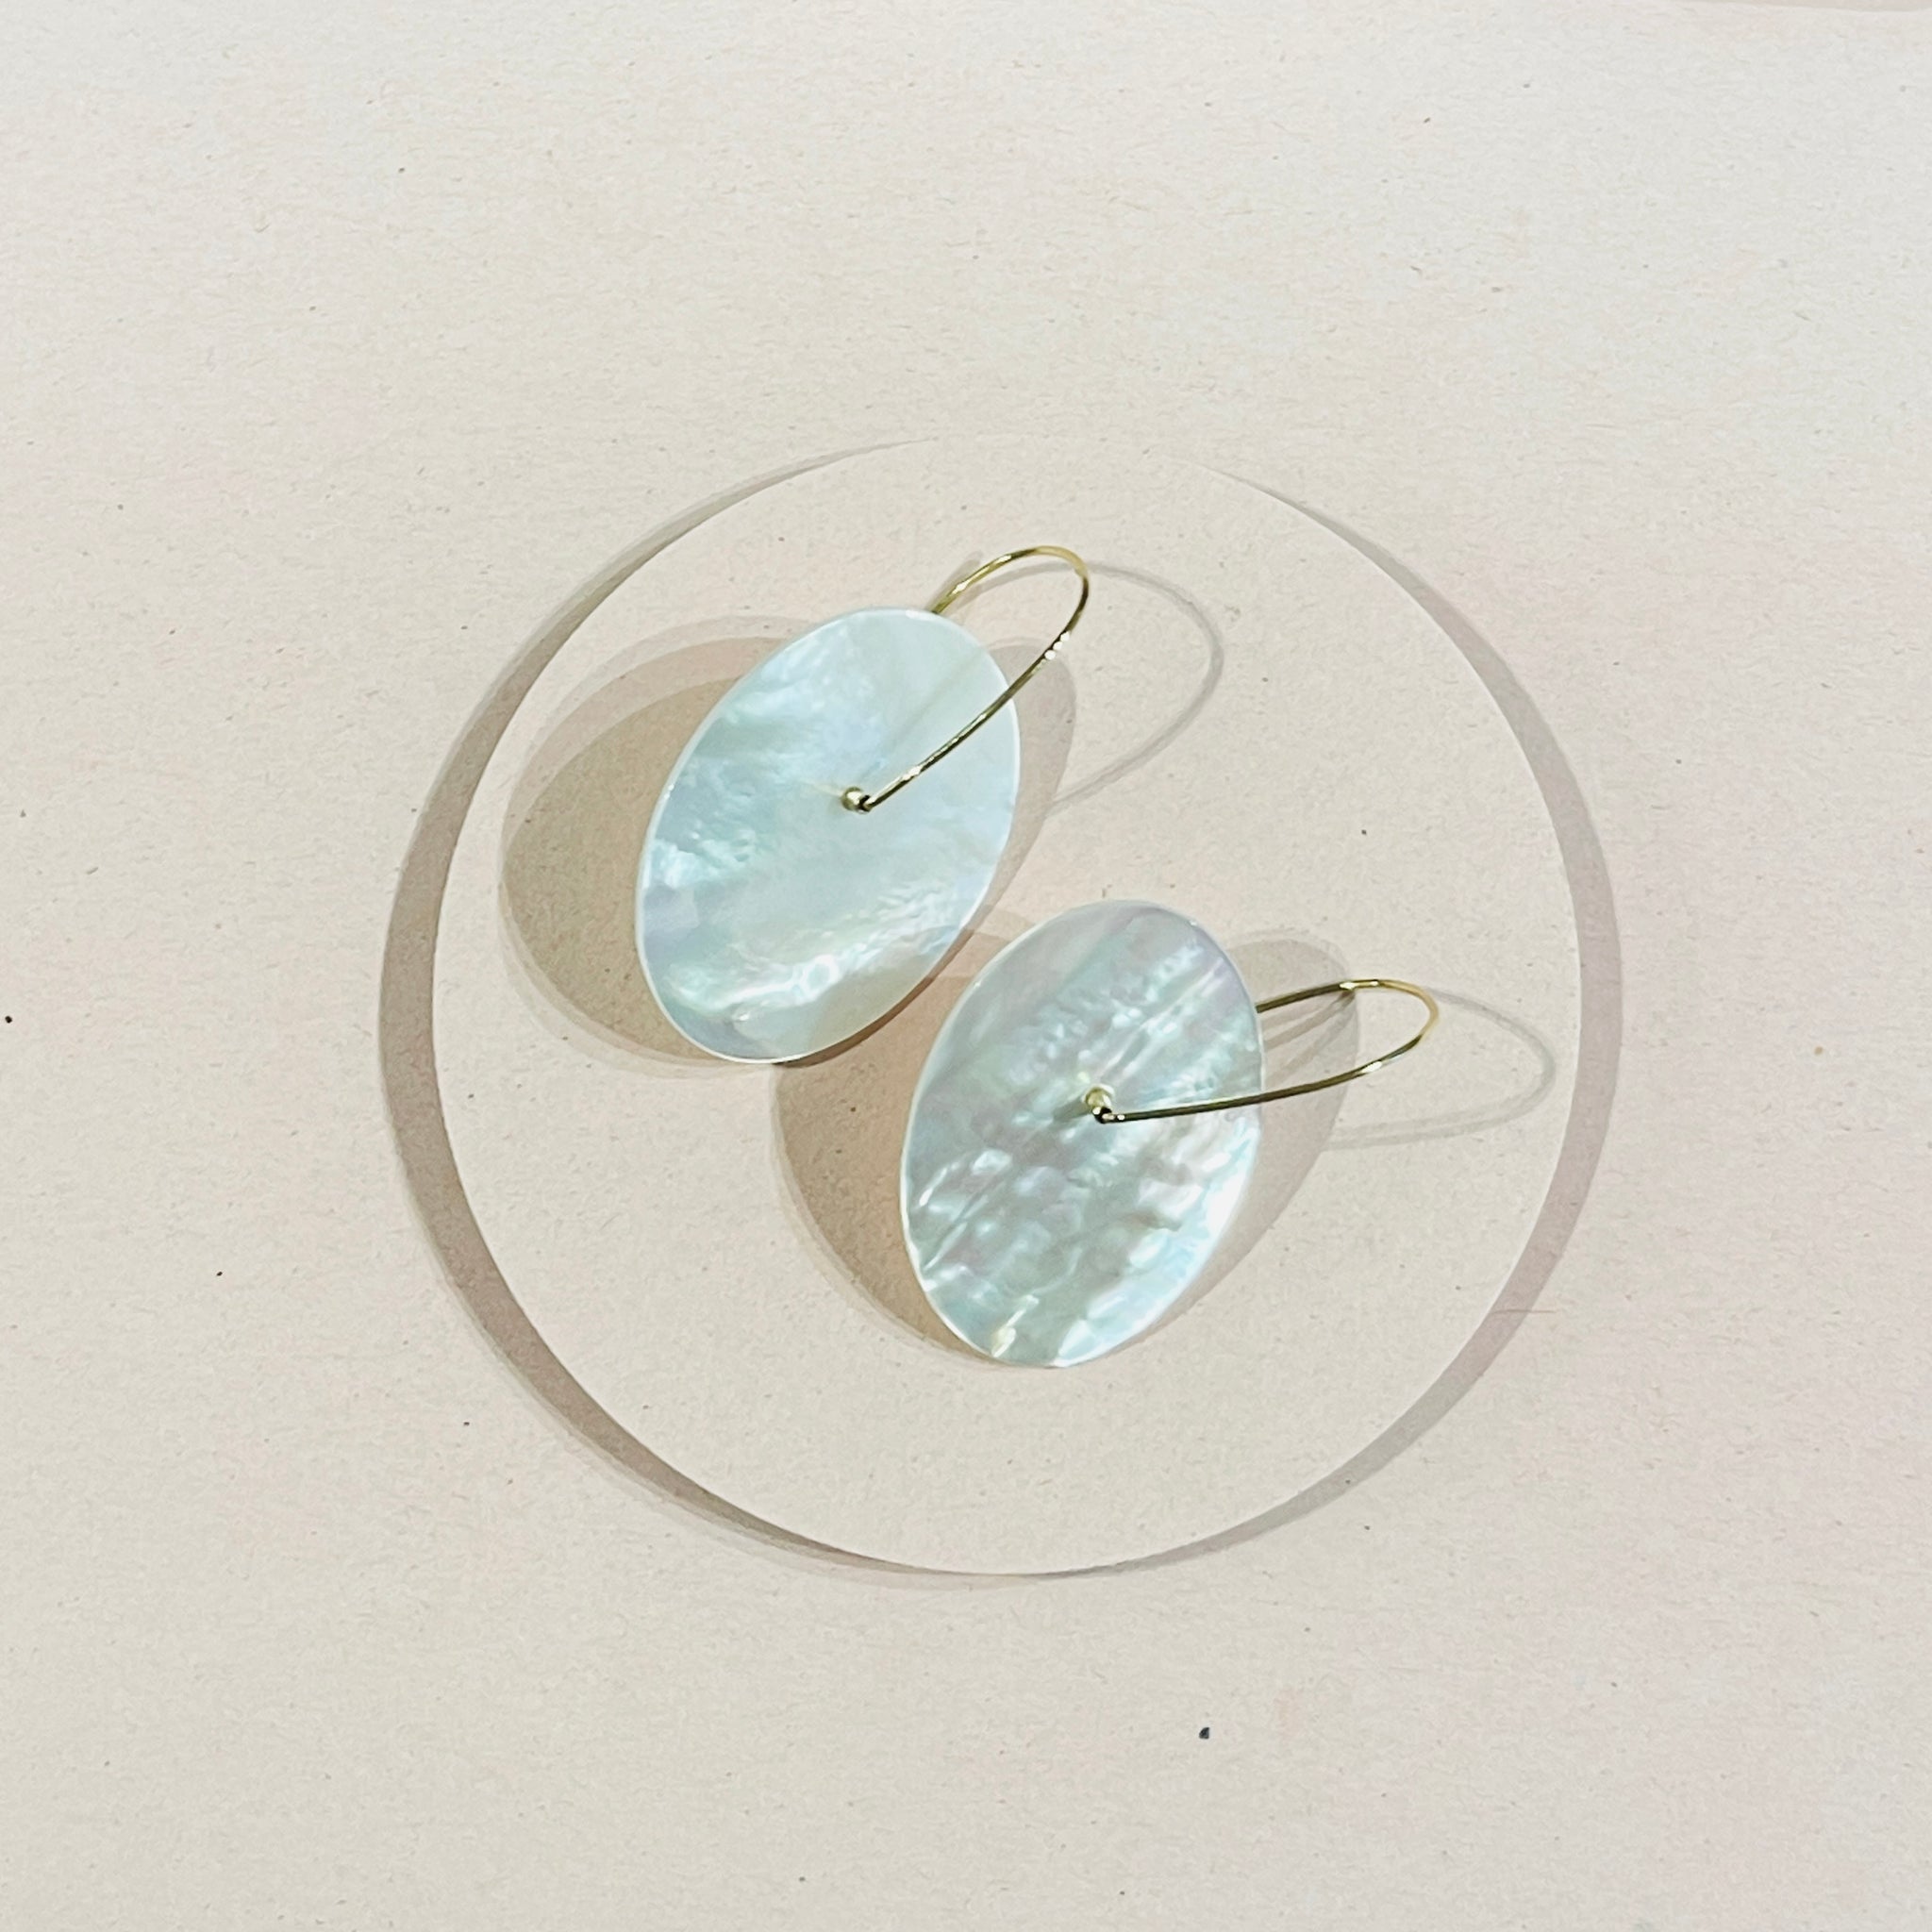 Mother of Pearl Balance Earrings